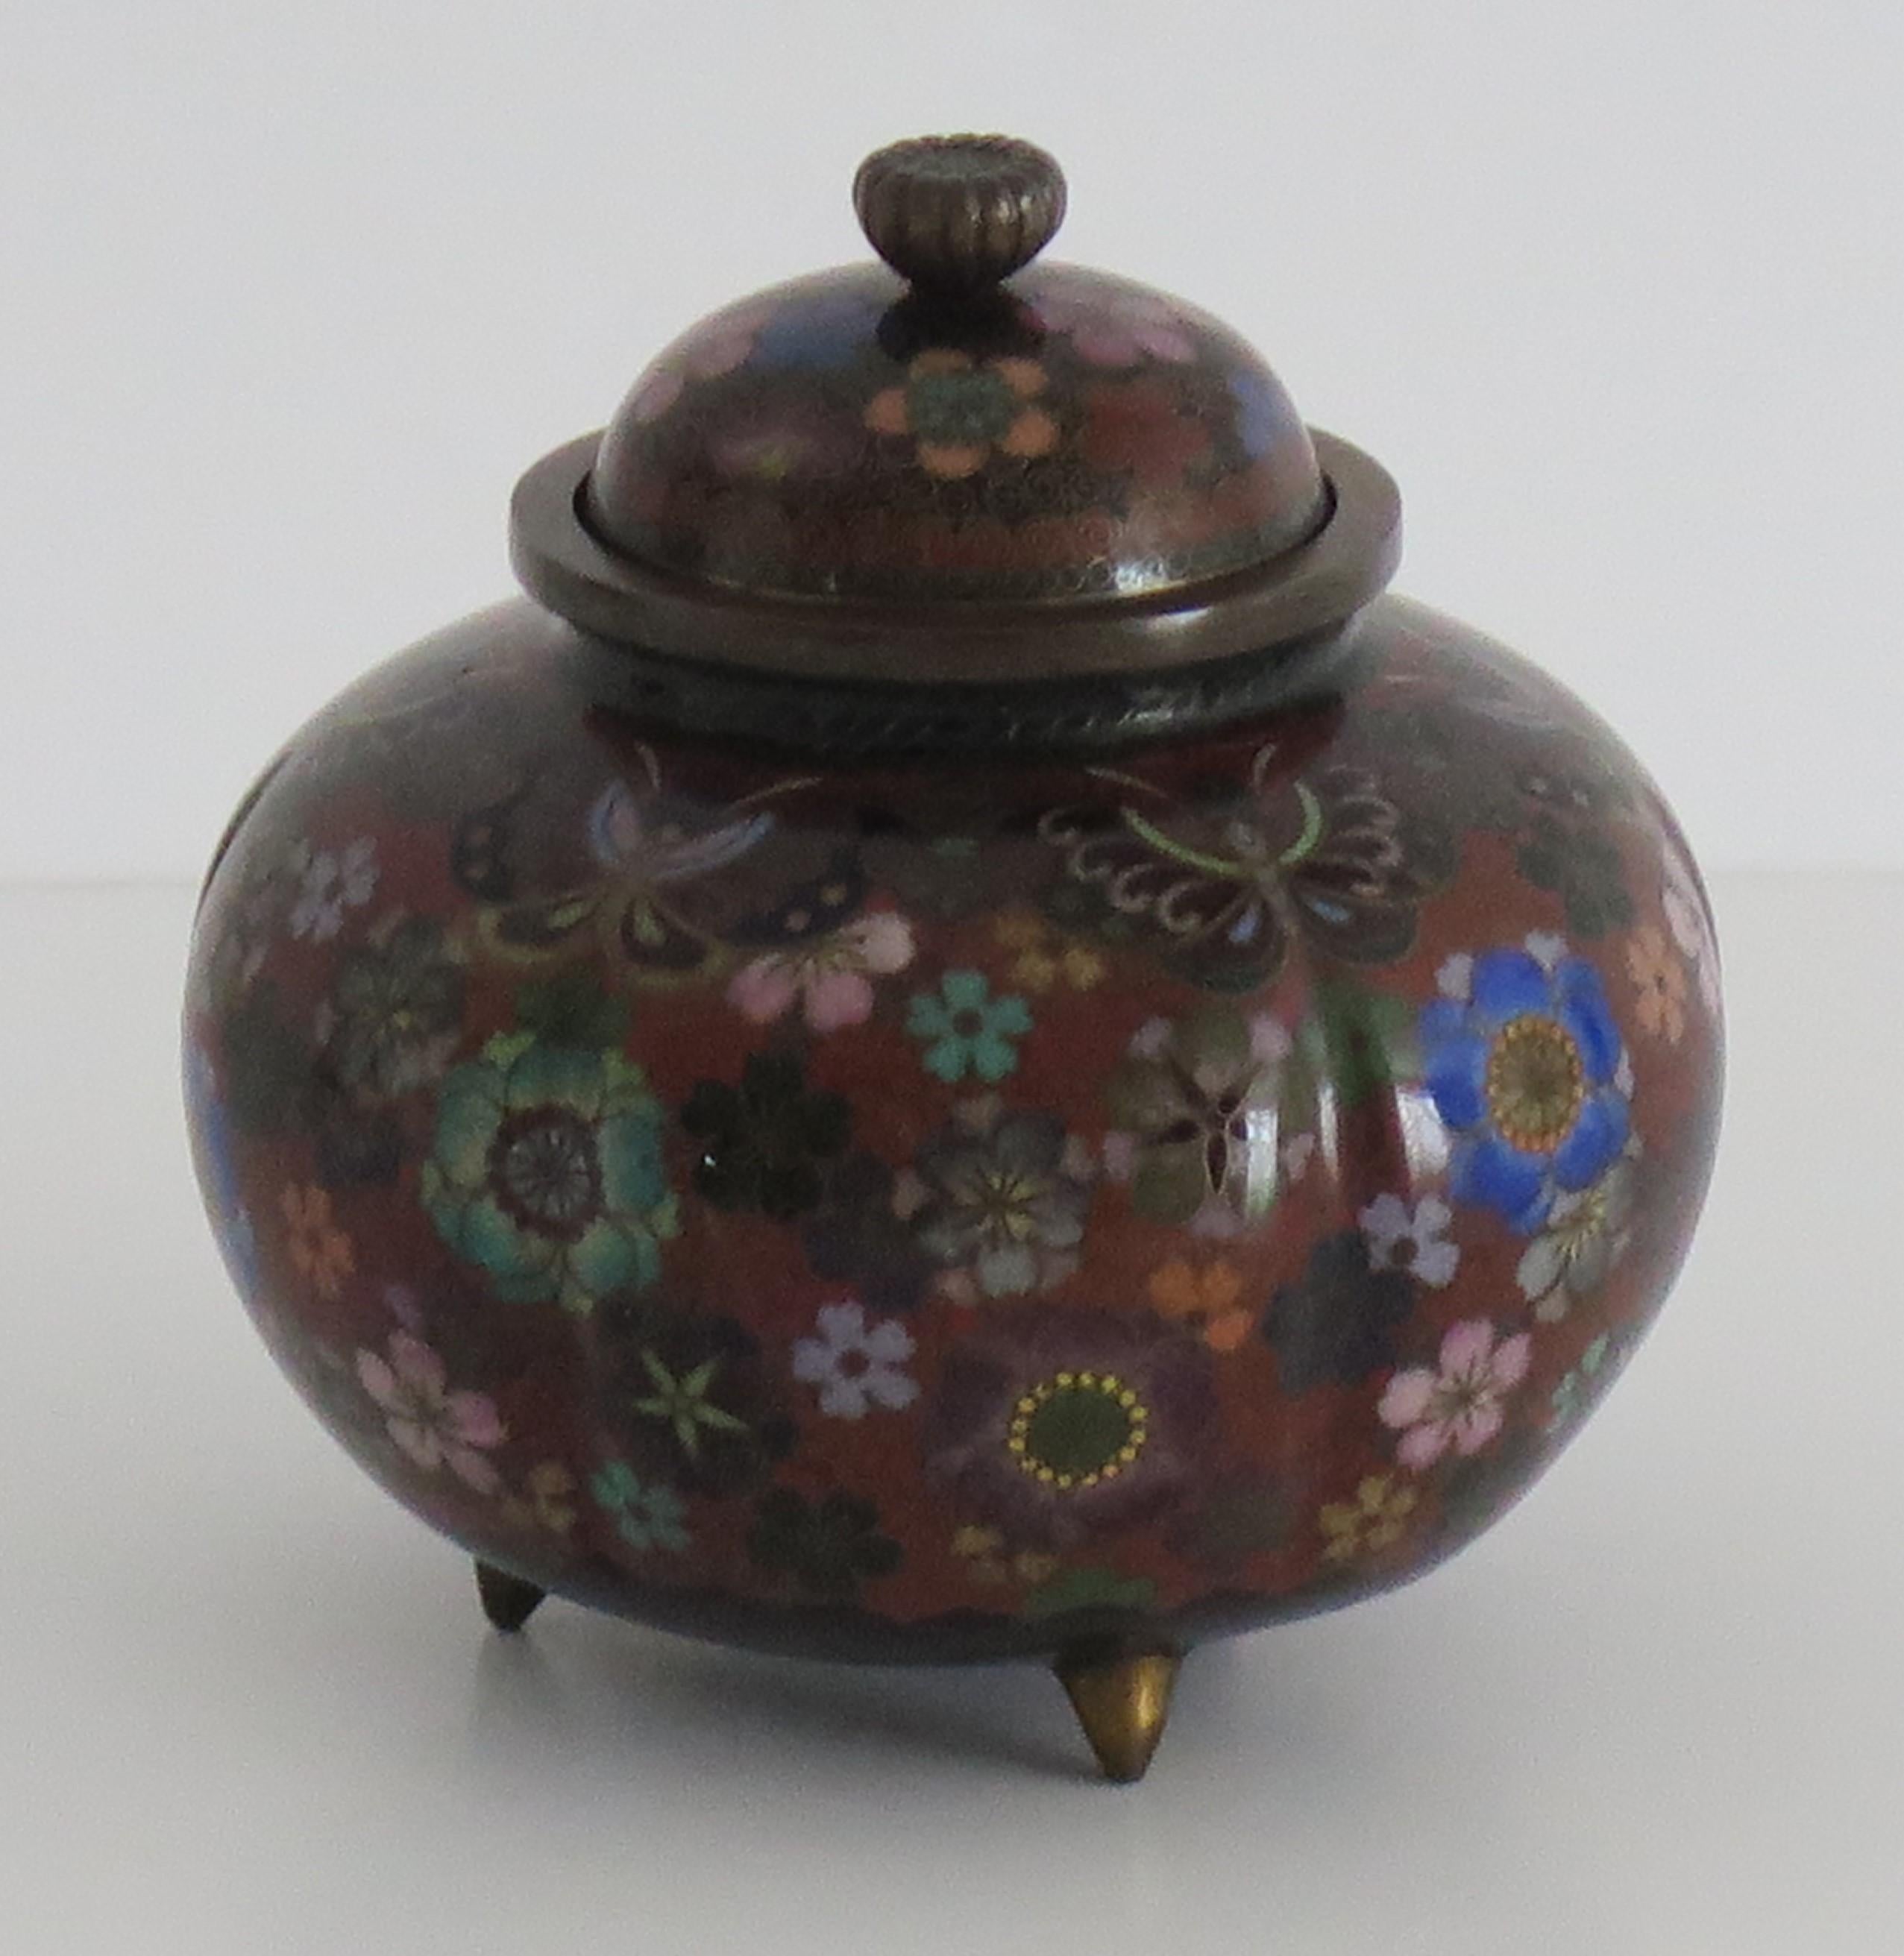 19th Century Japanese Cloisonné Lidded Jar Fine Decoration, Early Meiji Period  In Good Condition For Sale In Lincoln, Lincolnshire